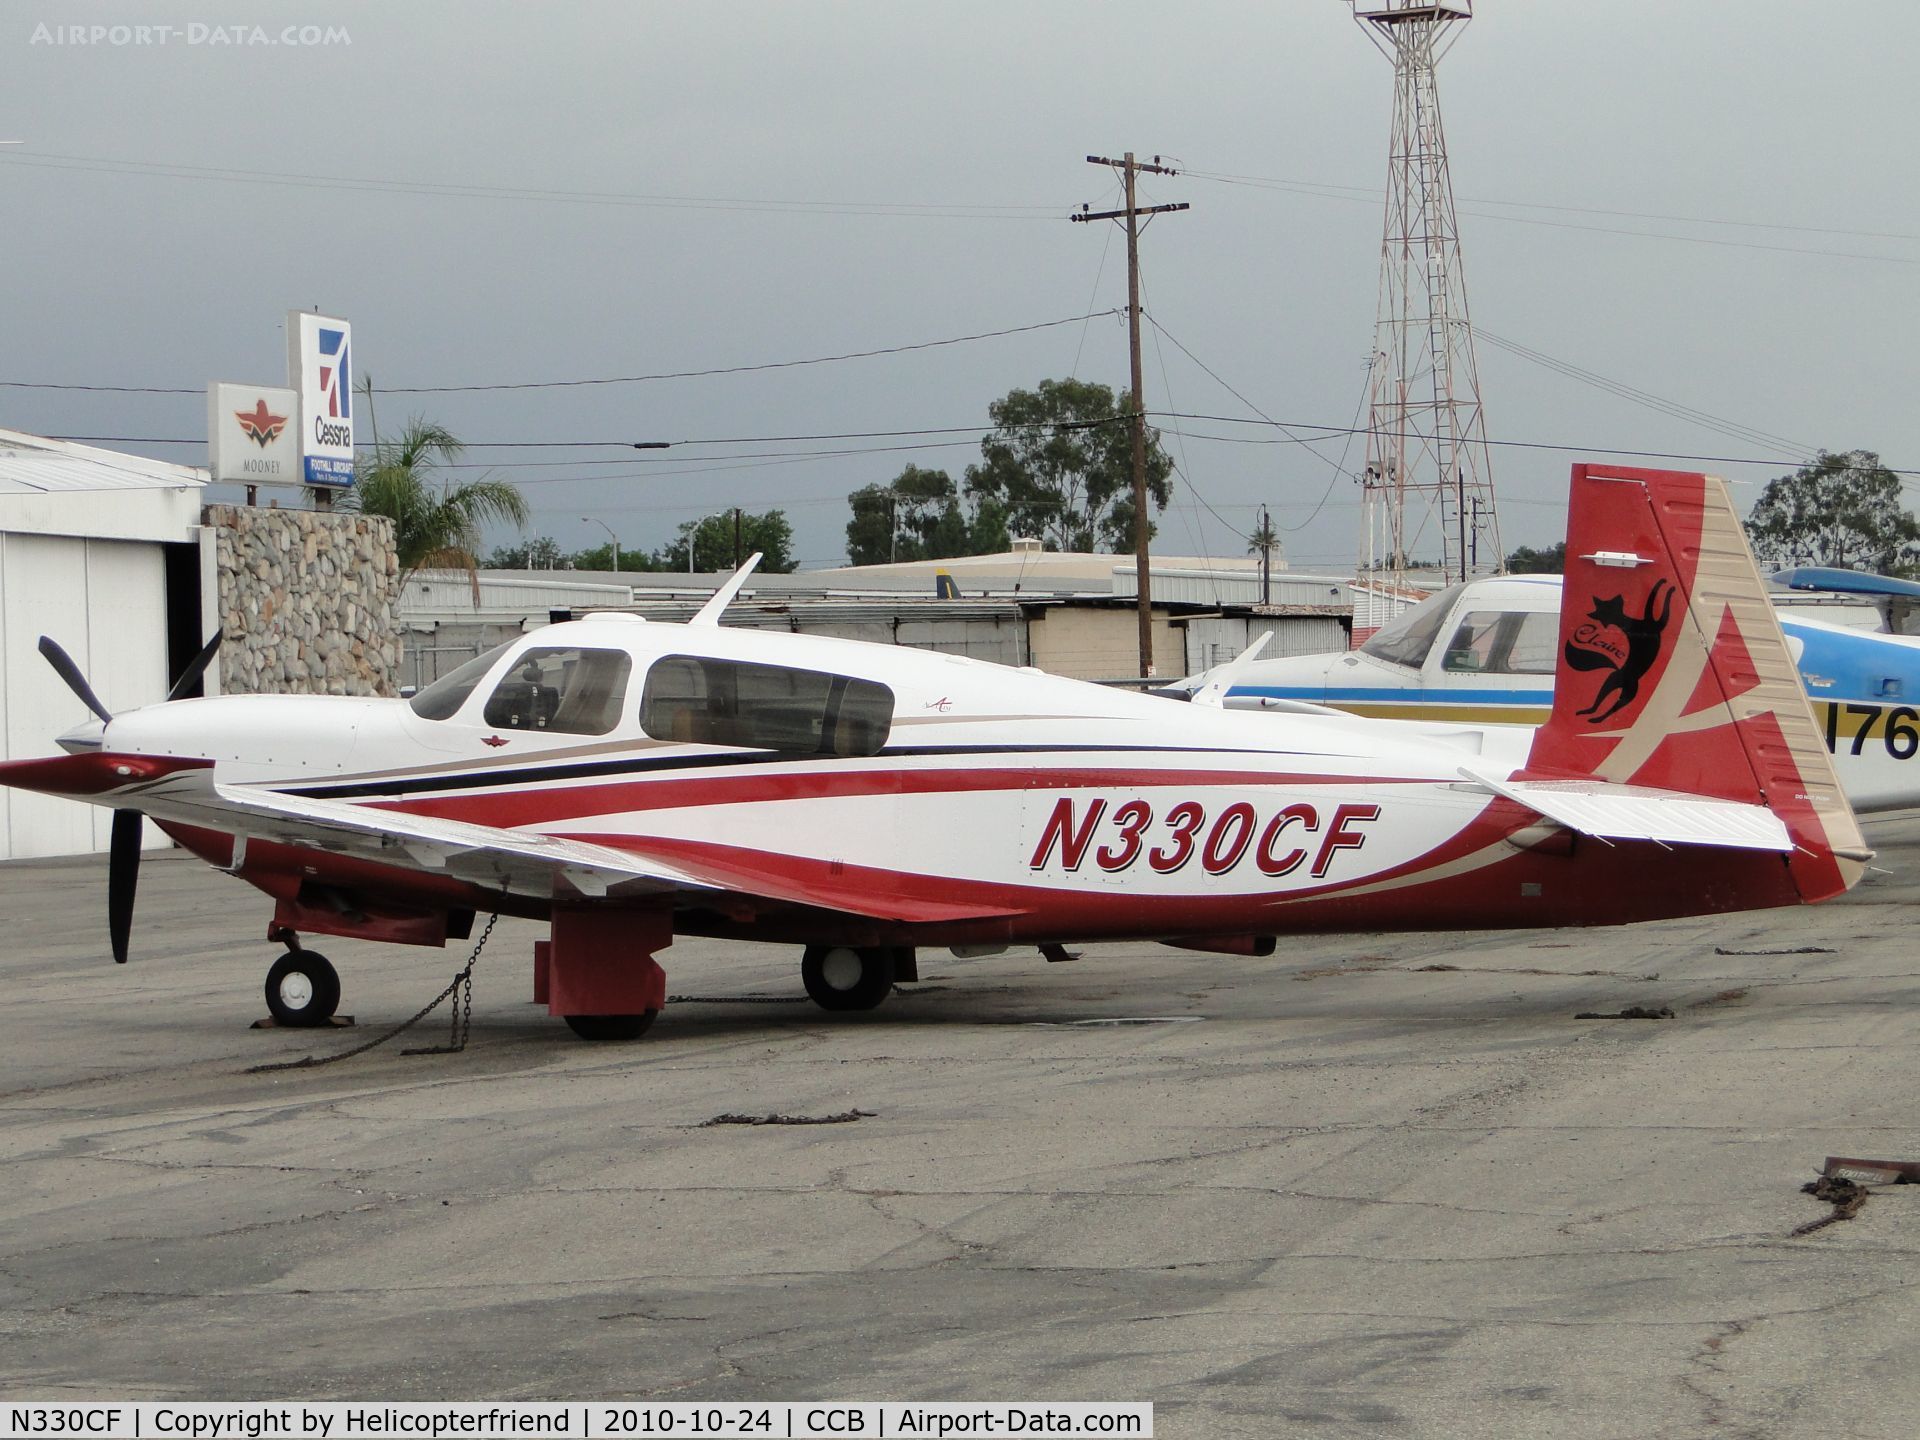 N330CF, 2007 Mooney M20TN Acclaim C/N 31-0067, Parked at Foothill Sales & Service